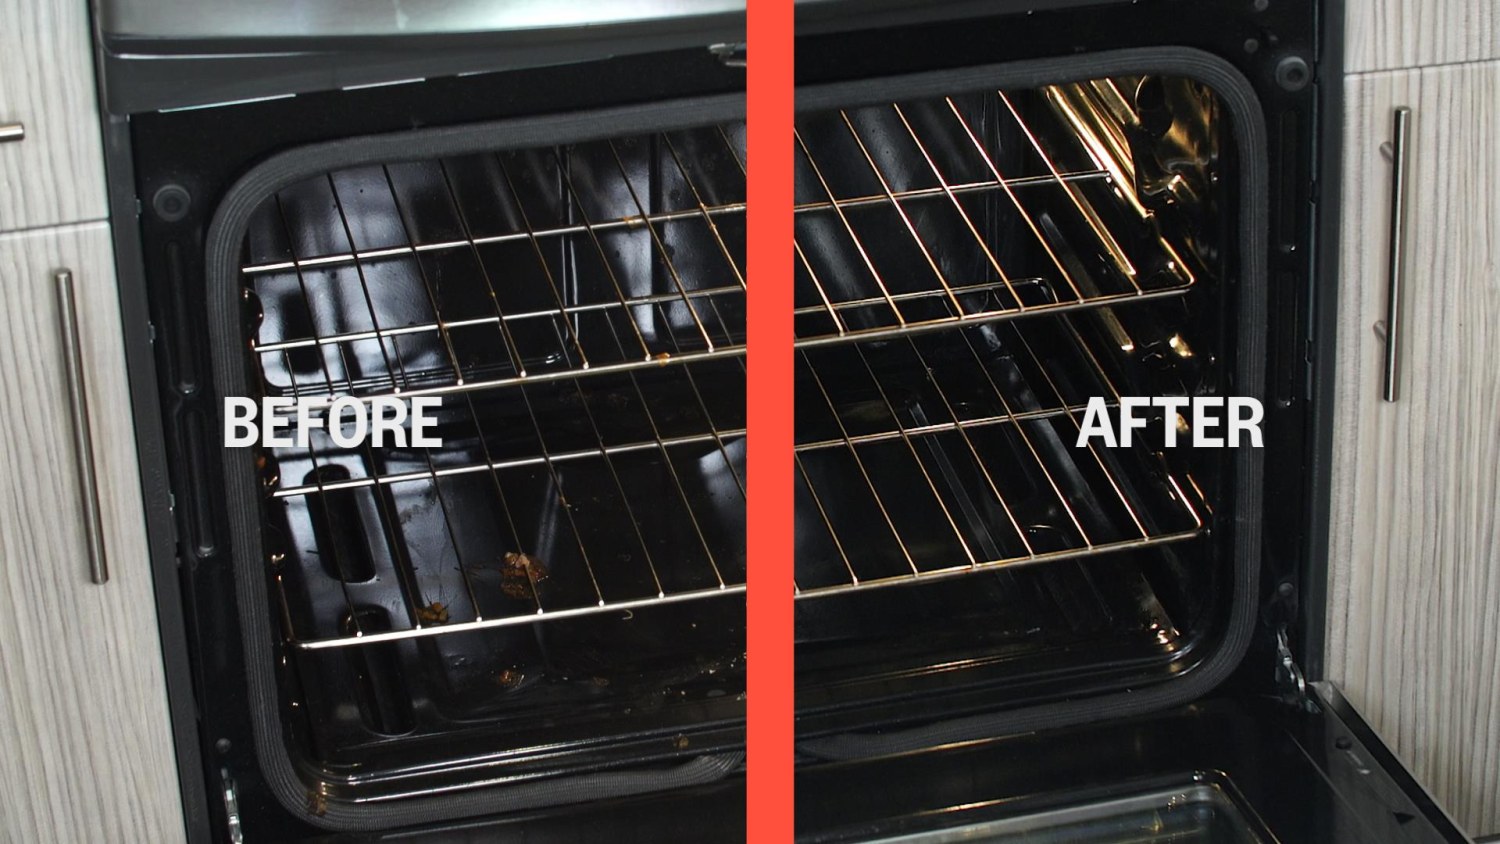 Cleaning Oven Racks with Dryer Sheets (+ Video)